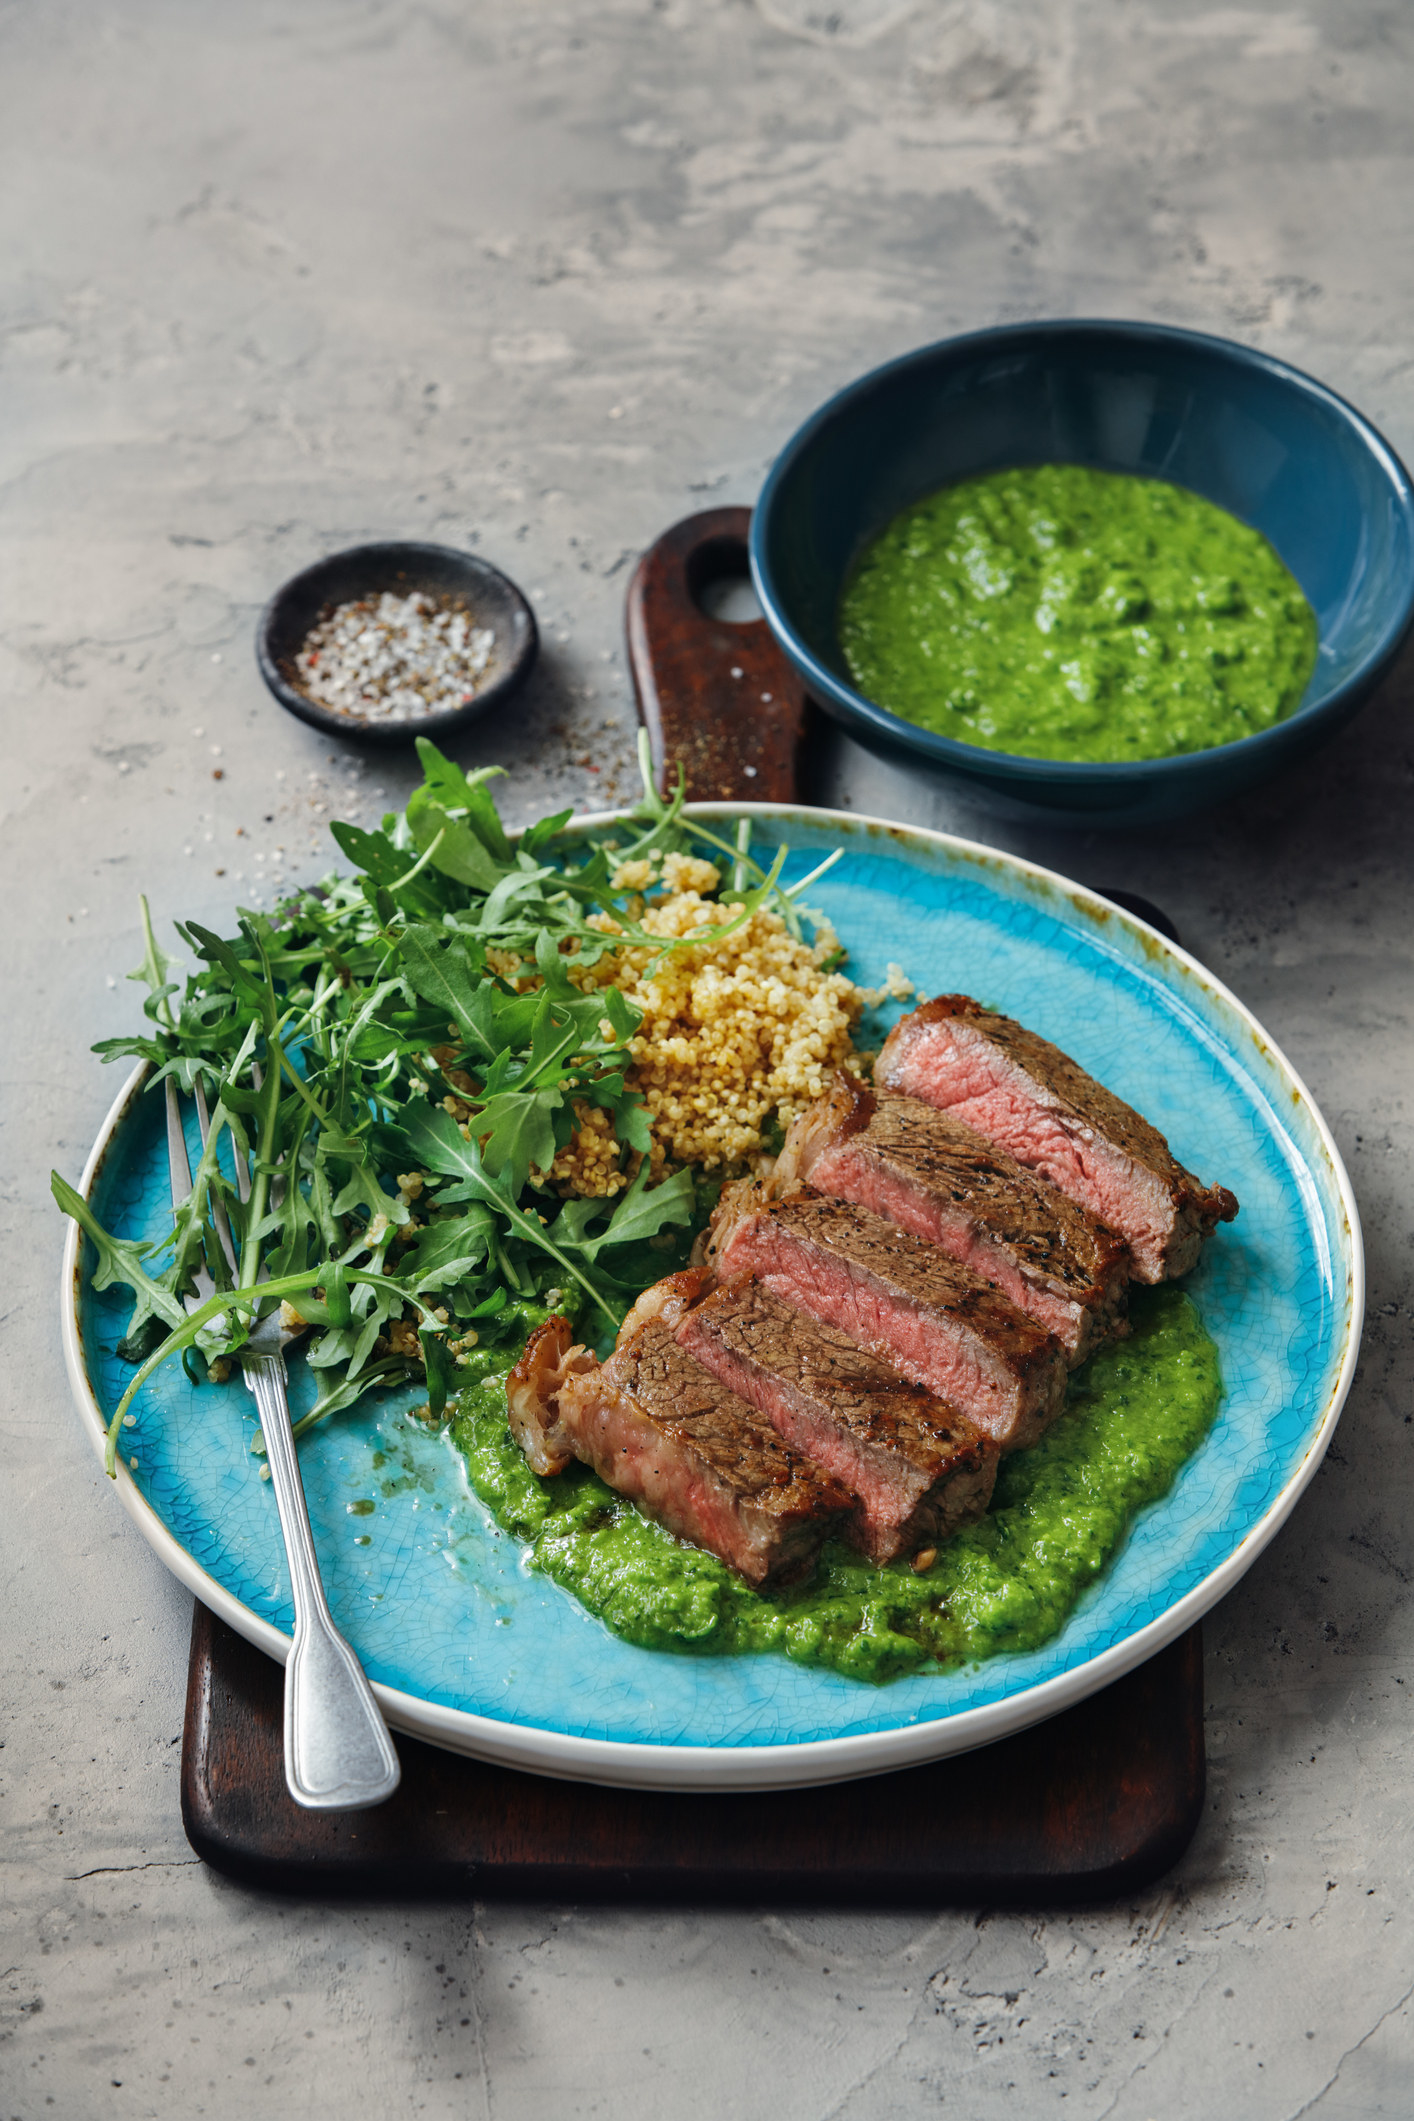 Sliced steak with couscous, arugula, and chimichurri.